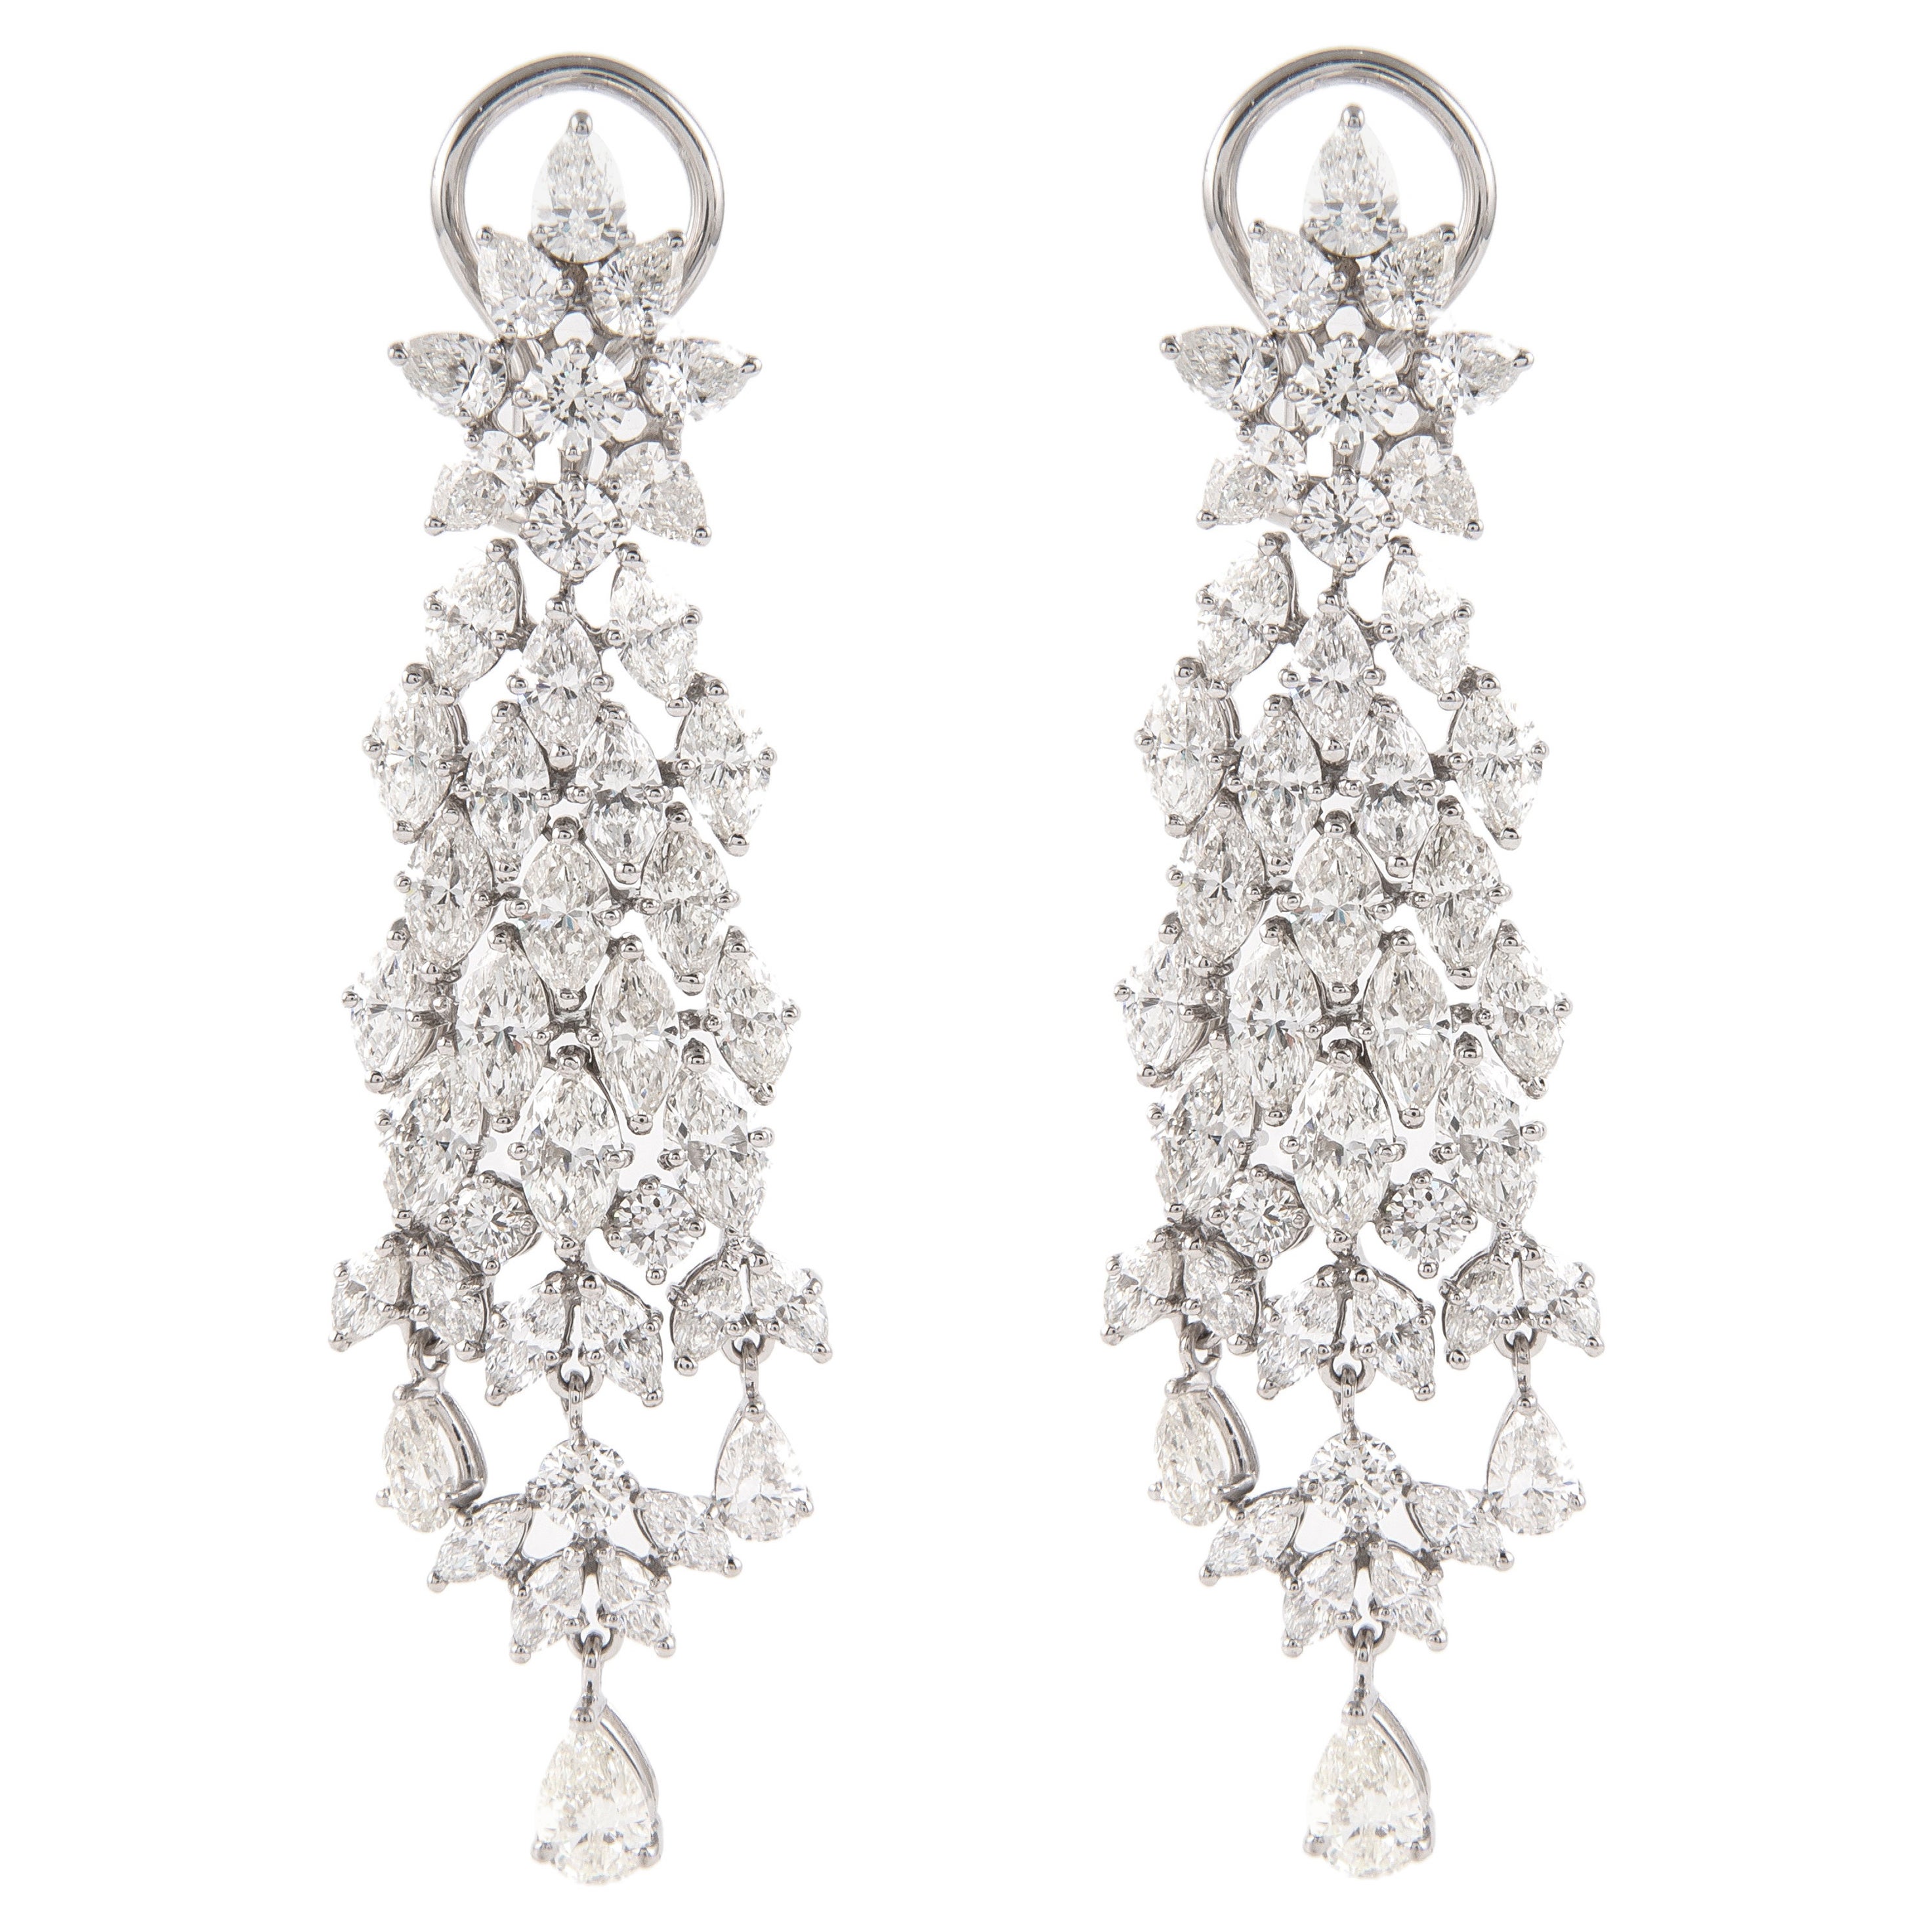 Vintage Apx 15.80ct Pear, Round, & Marquise Diamond Chandelier Earrings